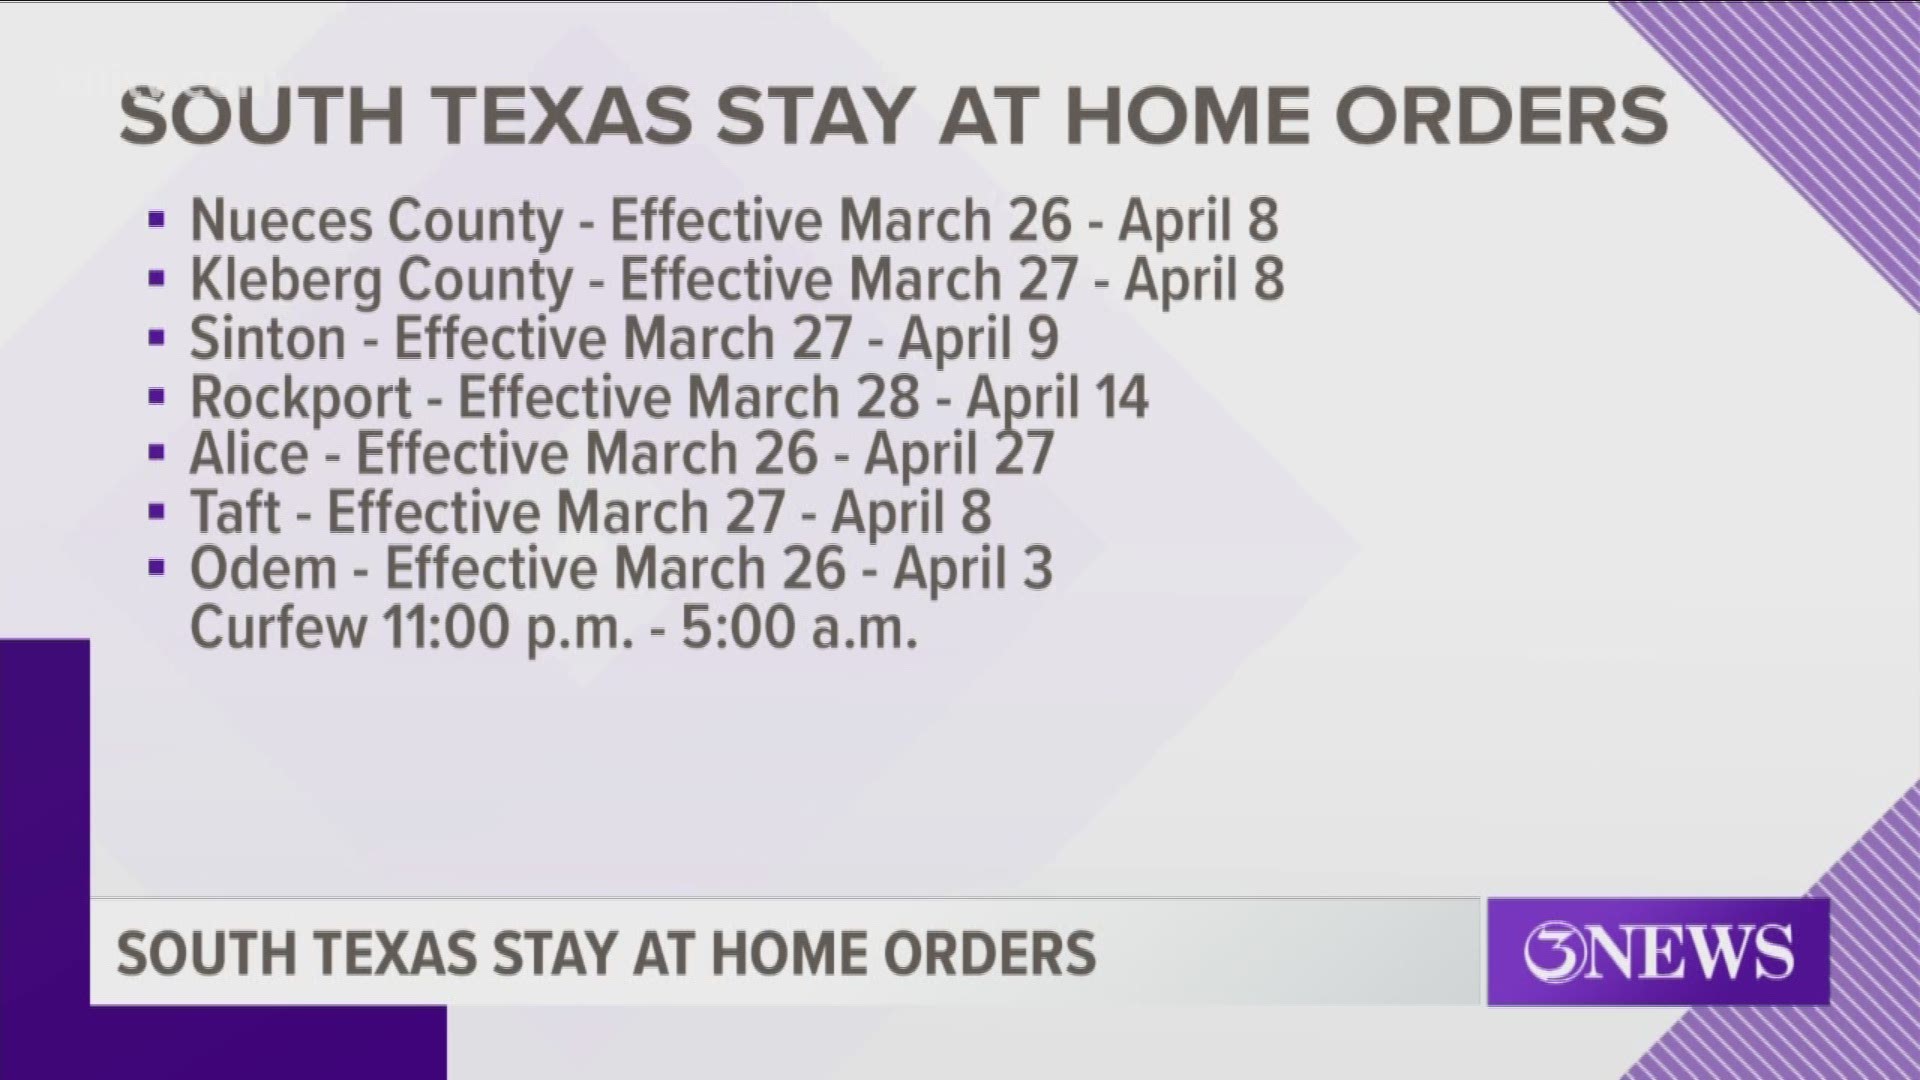 Various stay-at-home orders have been issued around the Coastal Bend as city and county leaders work to prevent the spread of COVID-19.